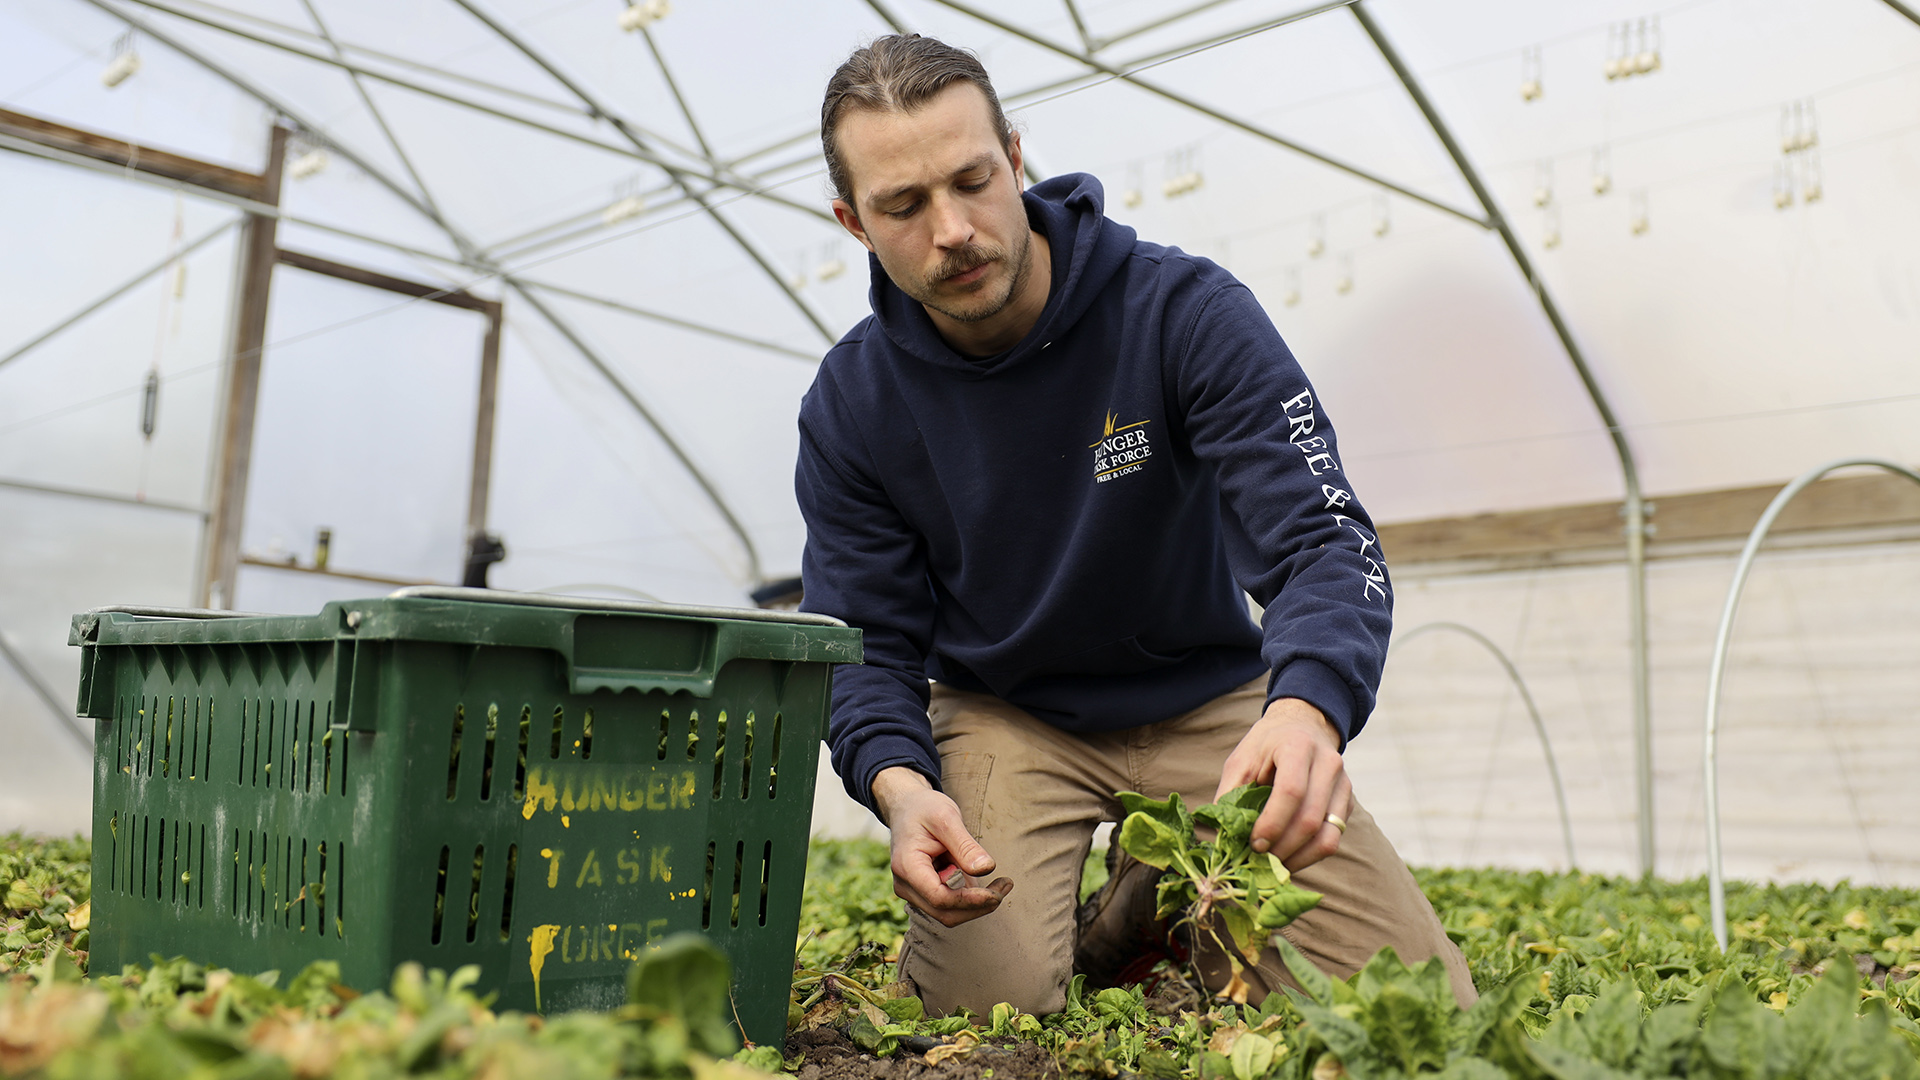 Jordan Leitnes pulls a spinach plant from the ground while kneeling next to a plastic crate with metal handles and a stencil label reading "Hunger Task Force" inside a hoop house with a wood-and-metal frame and plastic walls and roof.